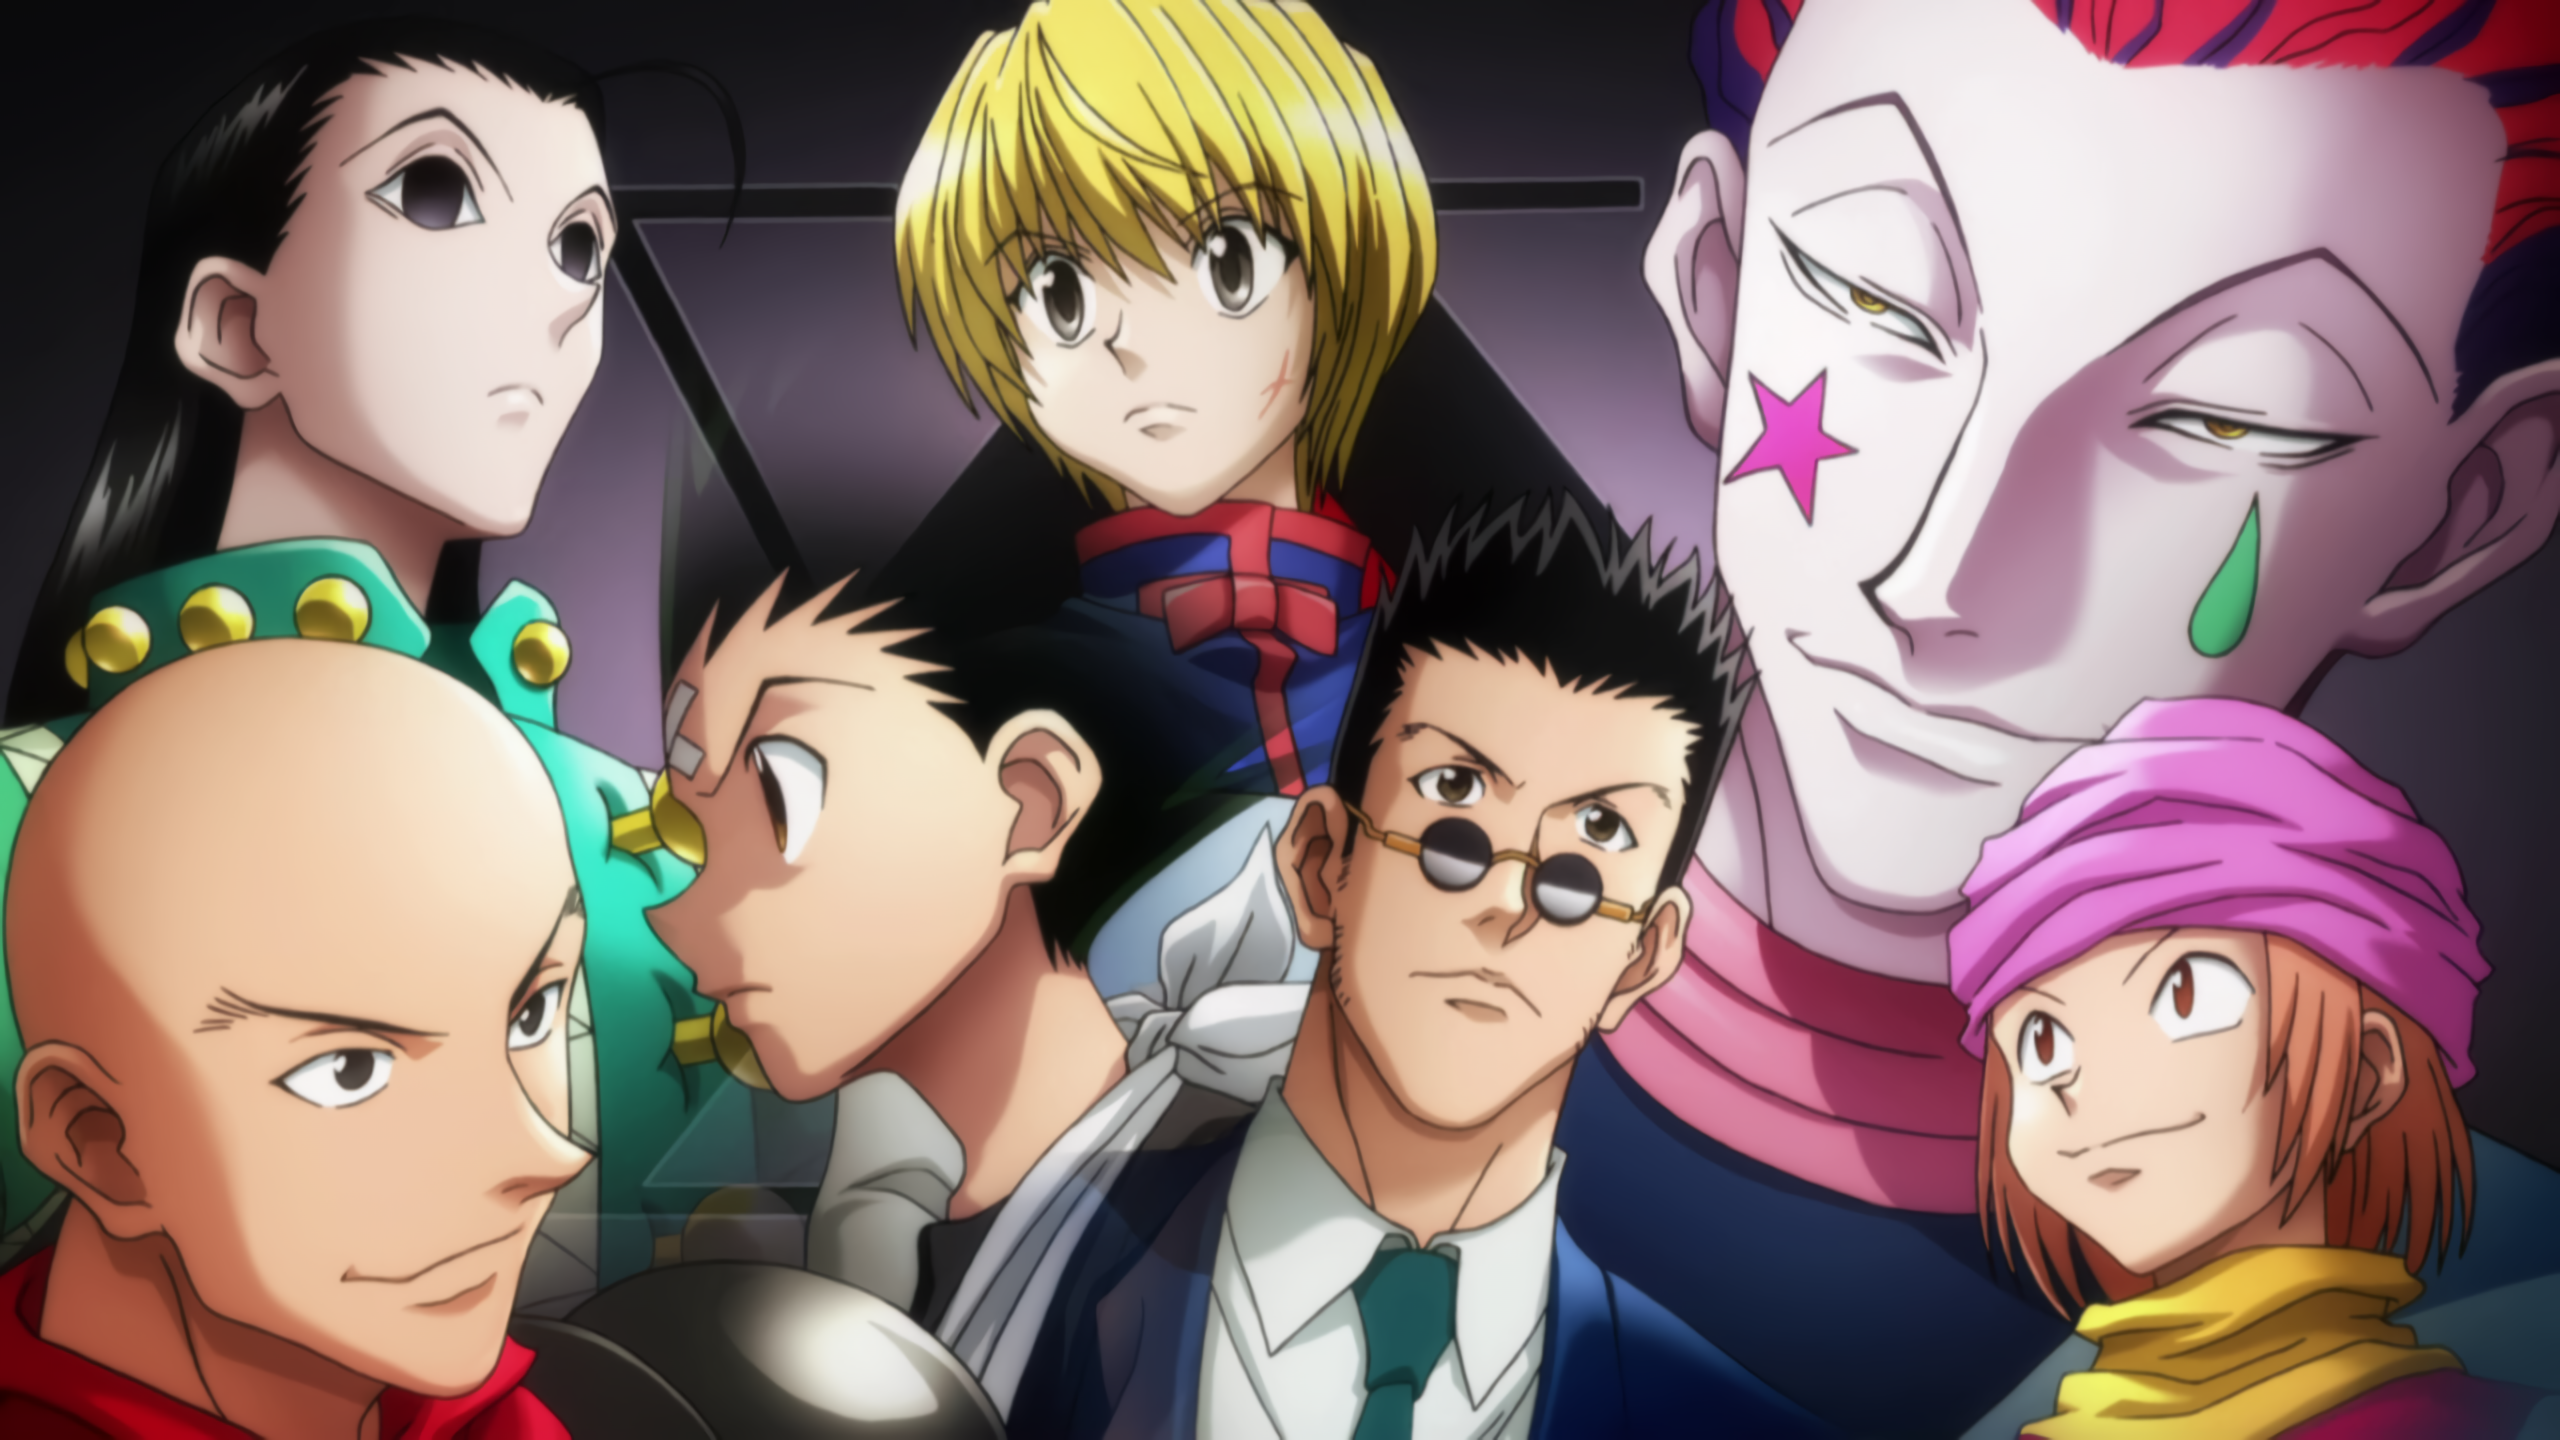 Review & Discussion: Zoldyck Family arc (Hunter x Hunter, 2011)